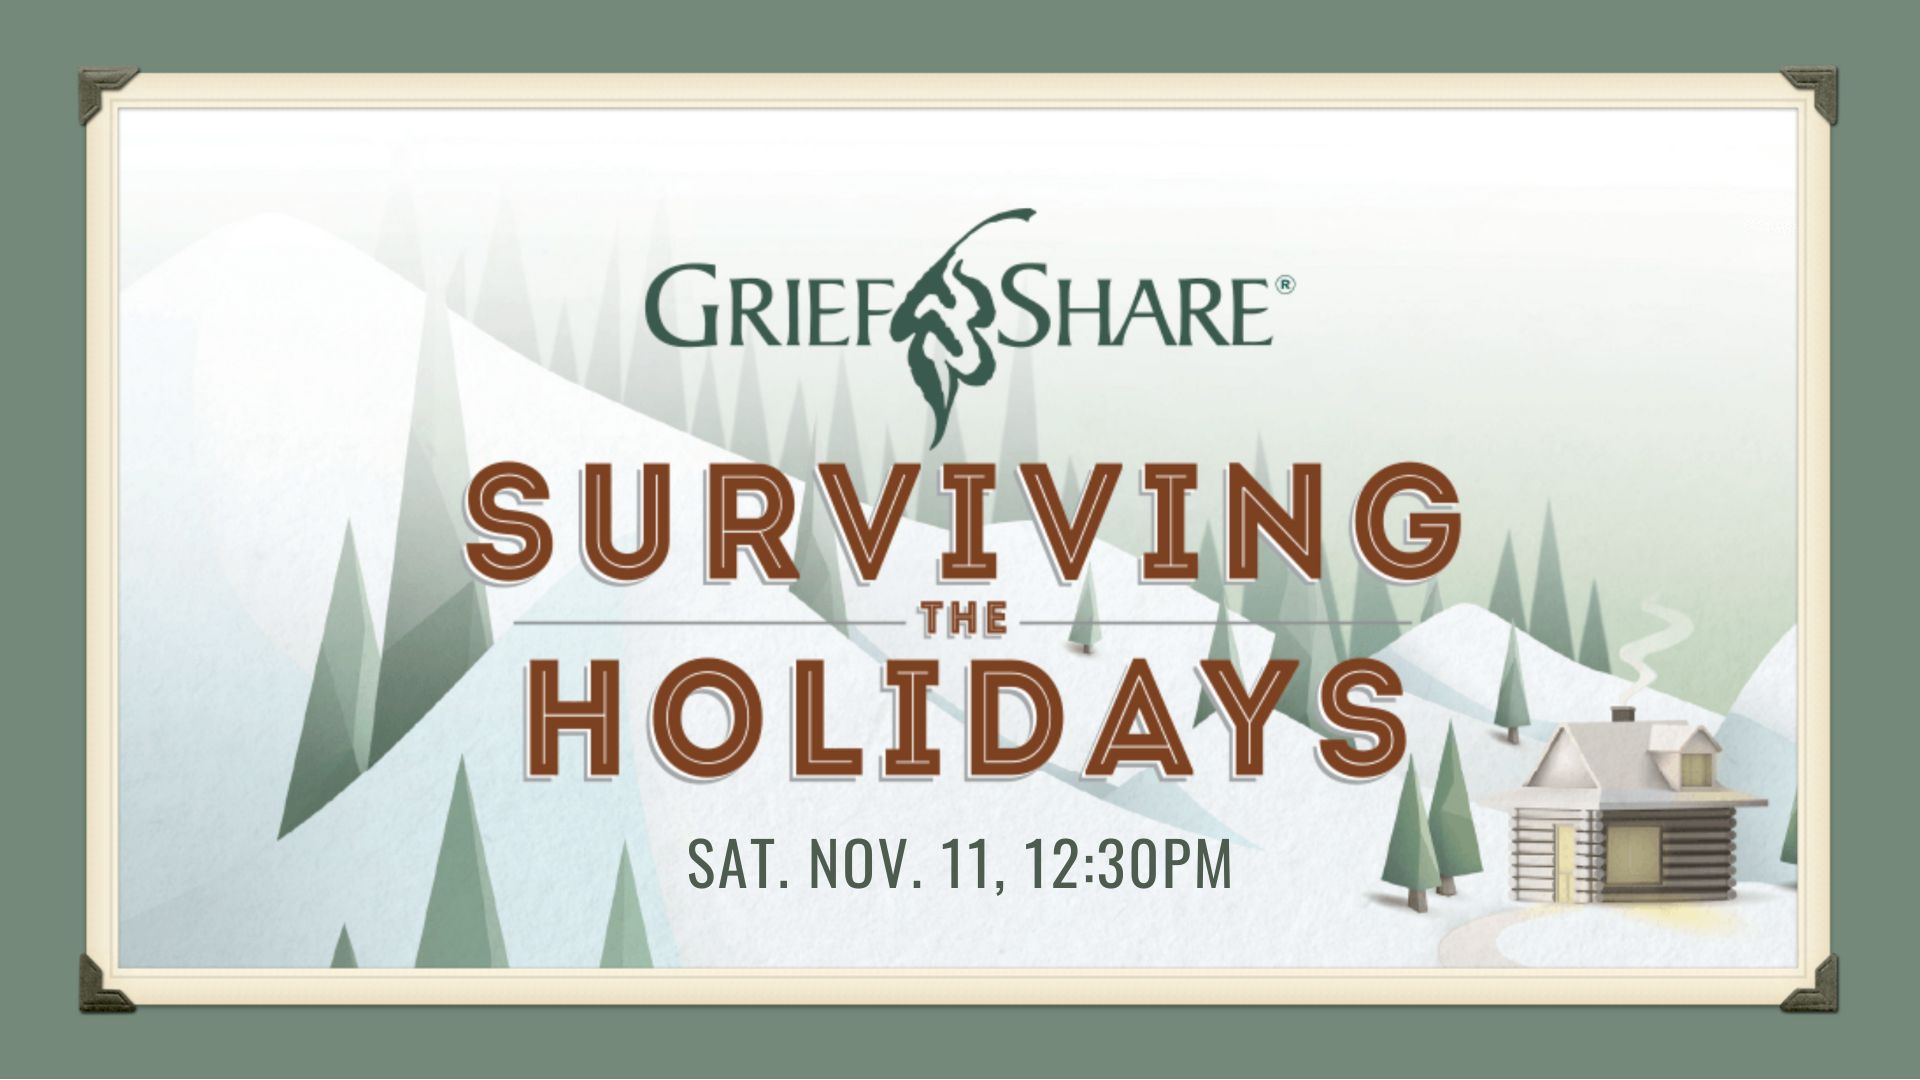 GriefShare Surviving the Holidays image